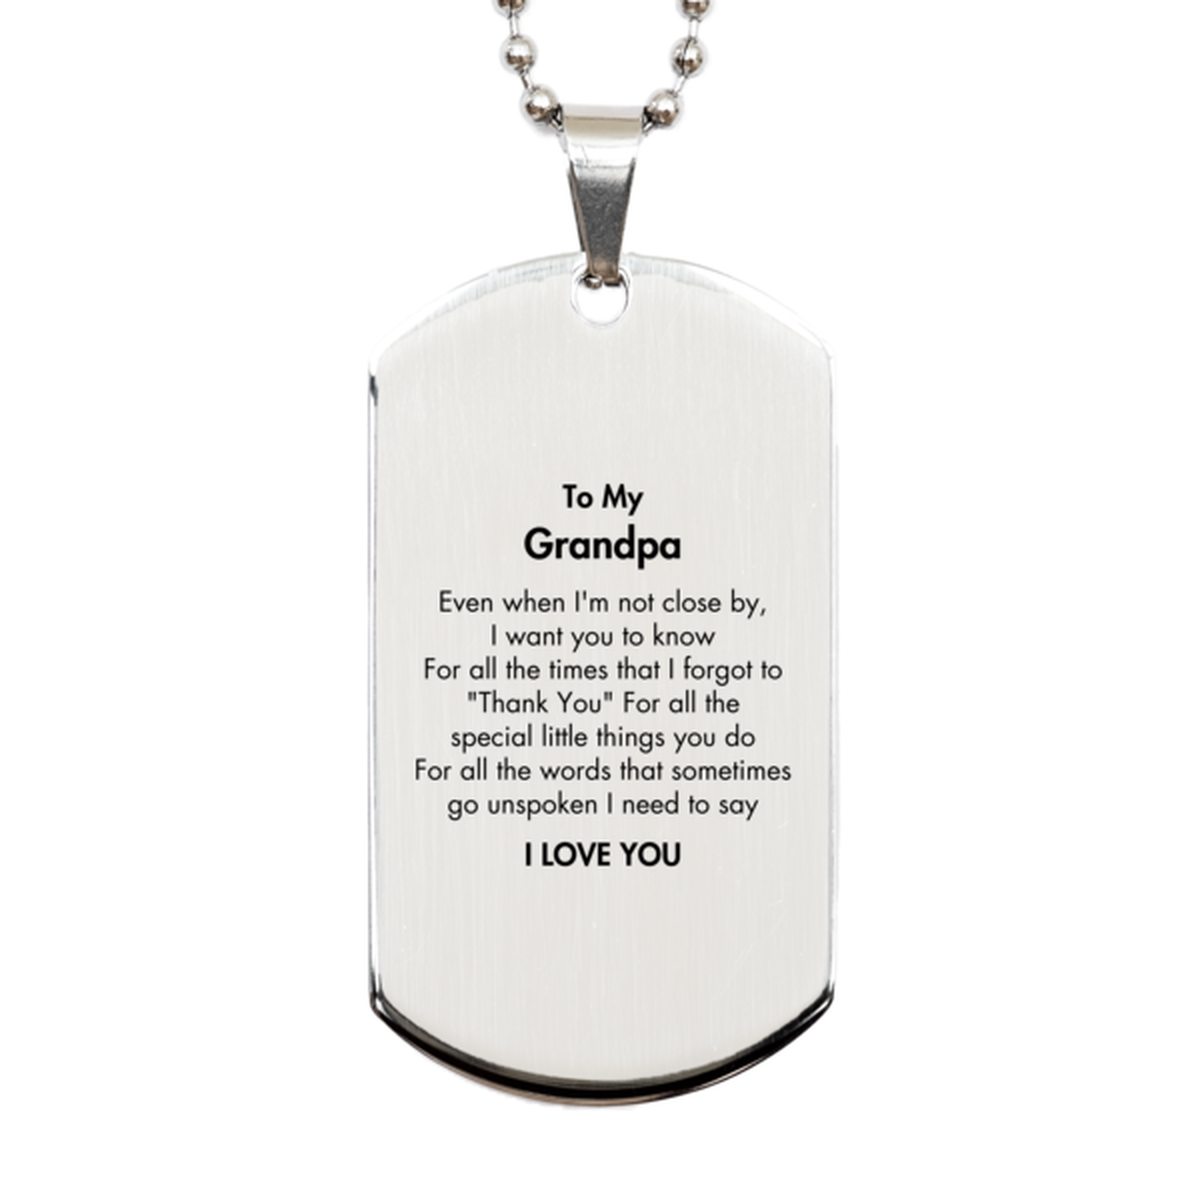 Thank You Gifts for Grandpa, Keepsake Silver Dog Tag Gifts for Grandpa Birthday Mother's day Father's Day Grandpa For all the words That sometimes go unspoken I need to say I LOVE YOU